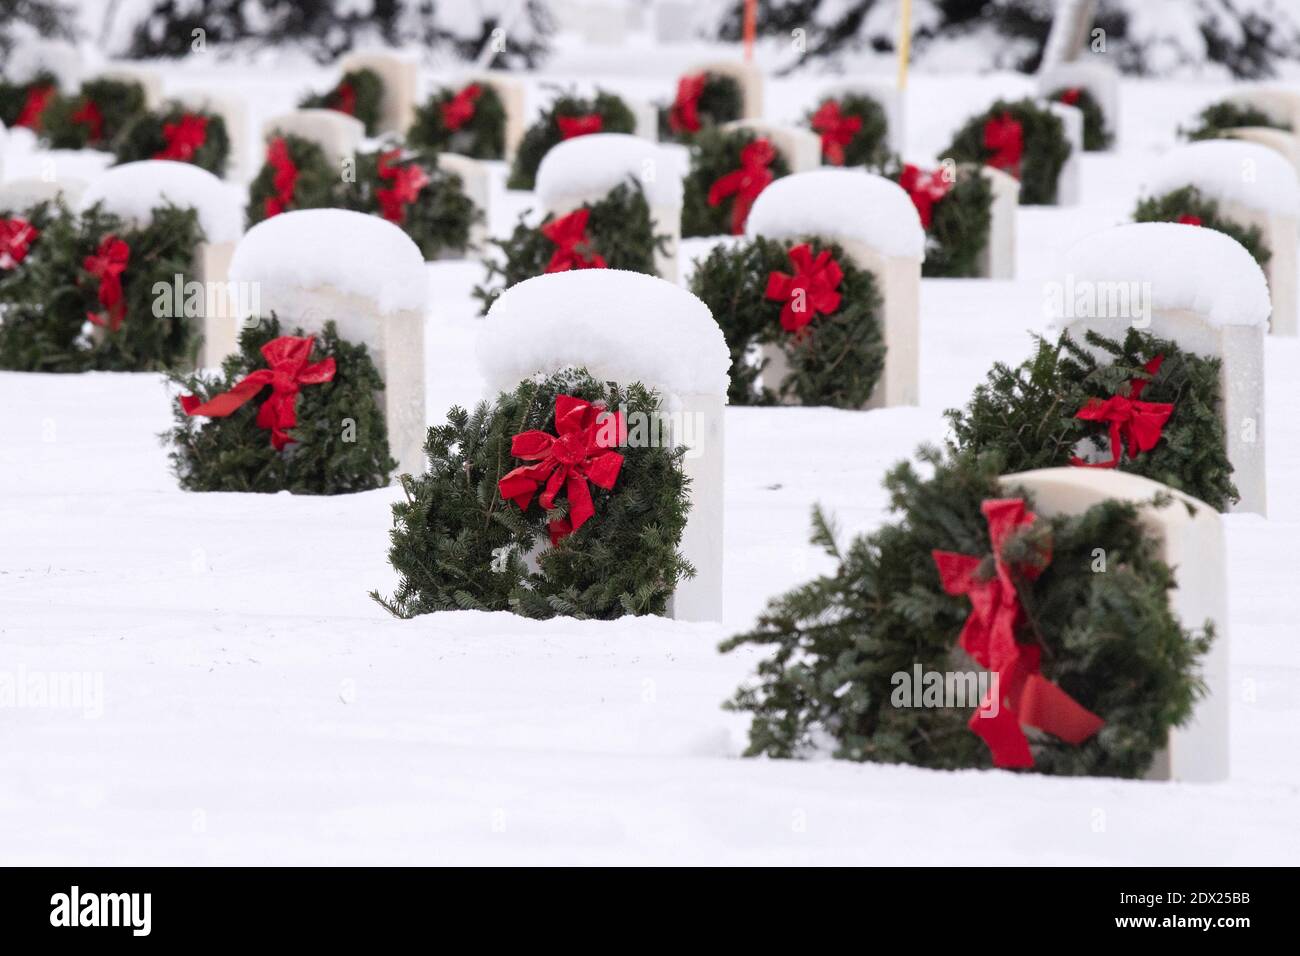 Anchorage, United States Of America. 18th Dec, 2020. Thousands of wreaths on gravesite of a fallen service member on the snow covered Fort Richardson National Cemetery during Wreaths Across America December 18, 2020 near Anchorage, Alaska. Wreaths Across America is to honor and remember fallen service members throughout the holiday season. Credit: Planetpix/Alamy Live News Stock Photo